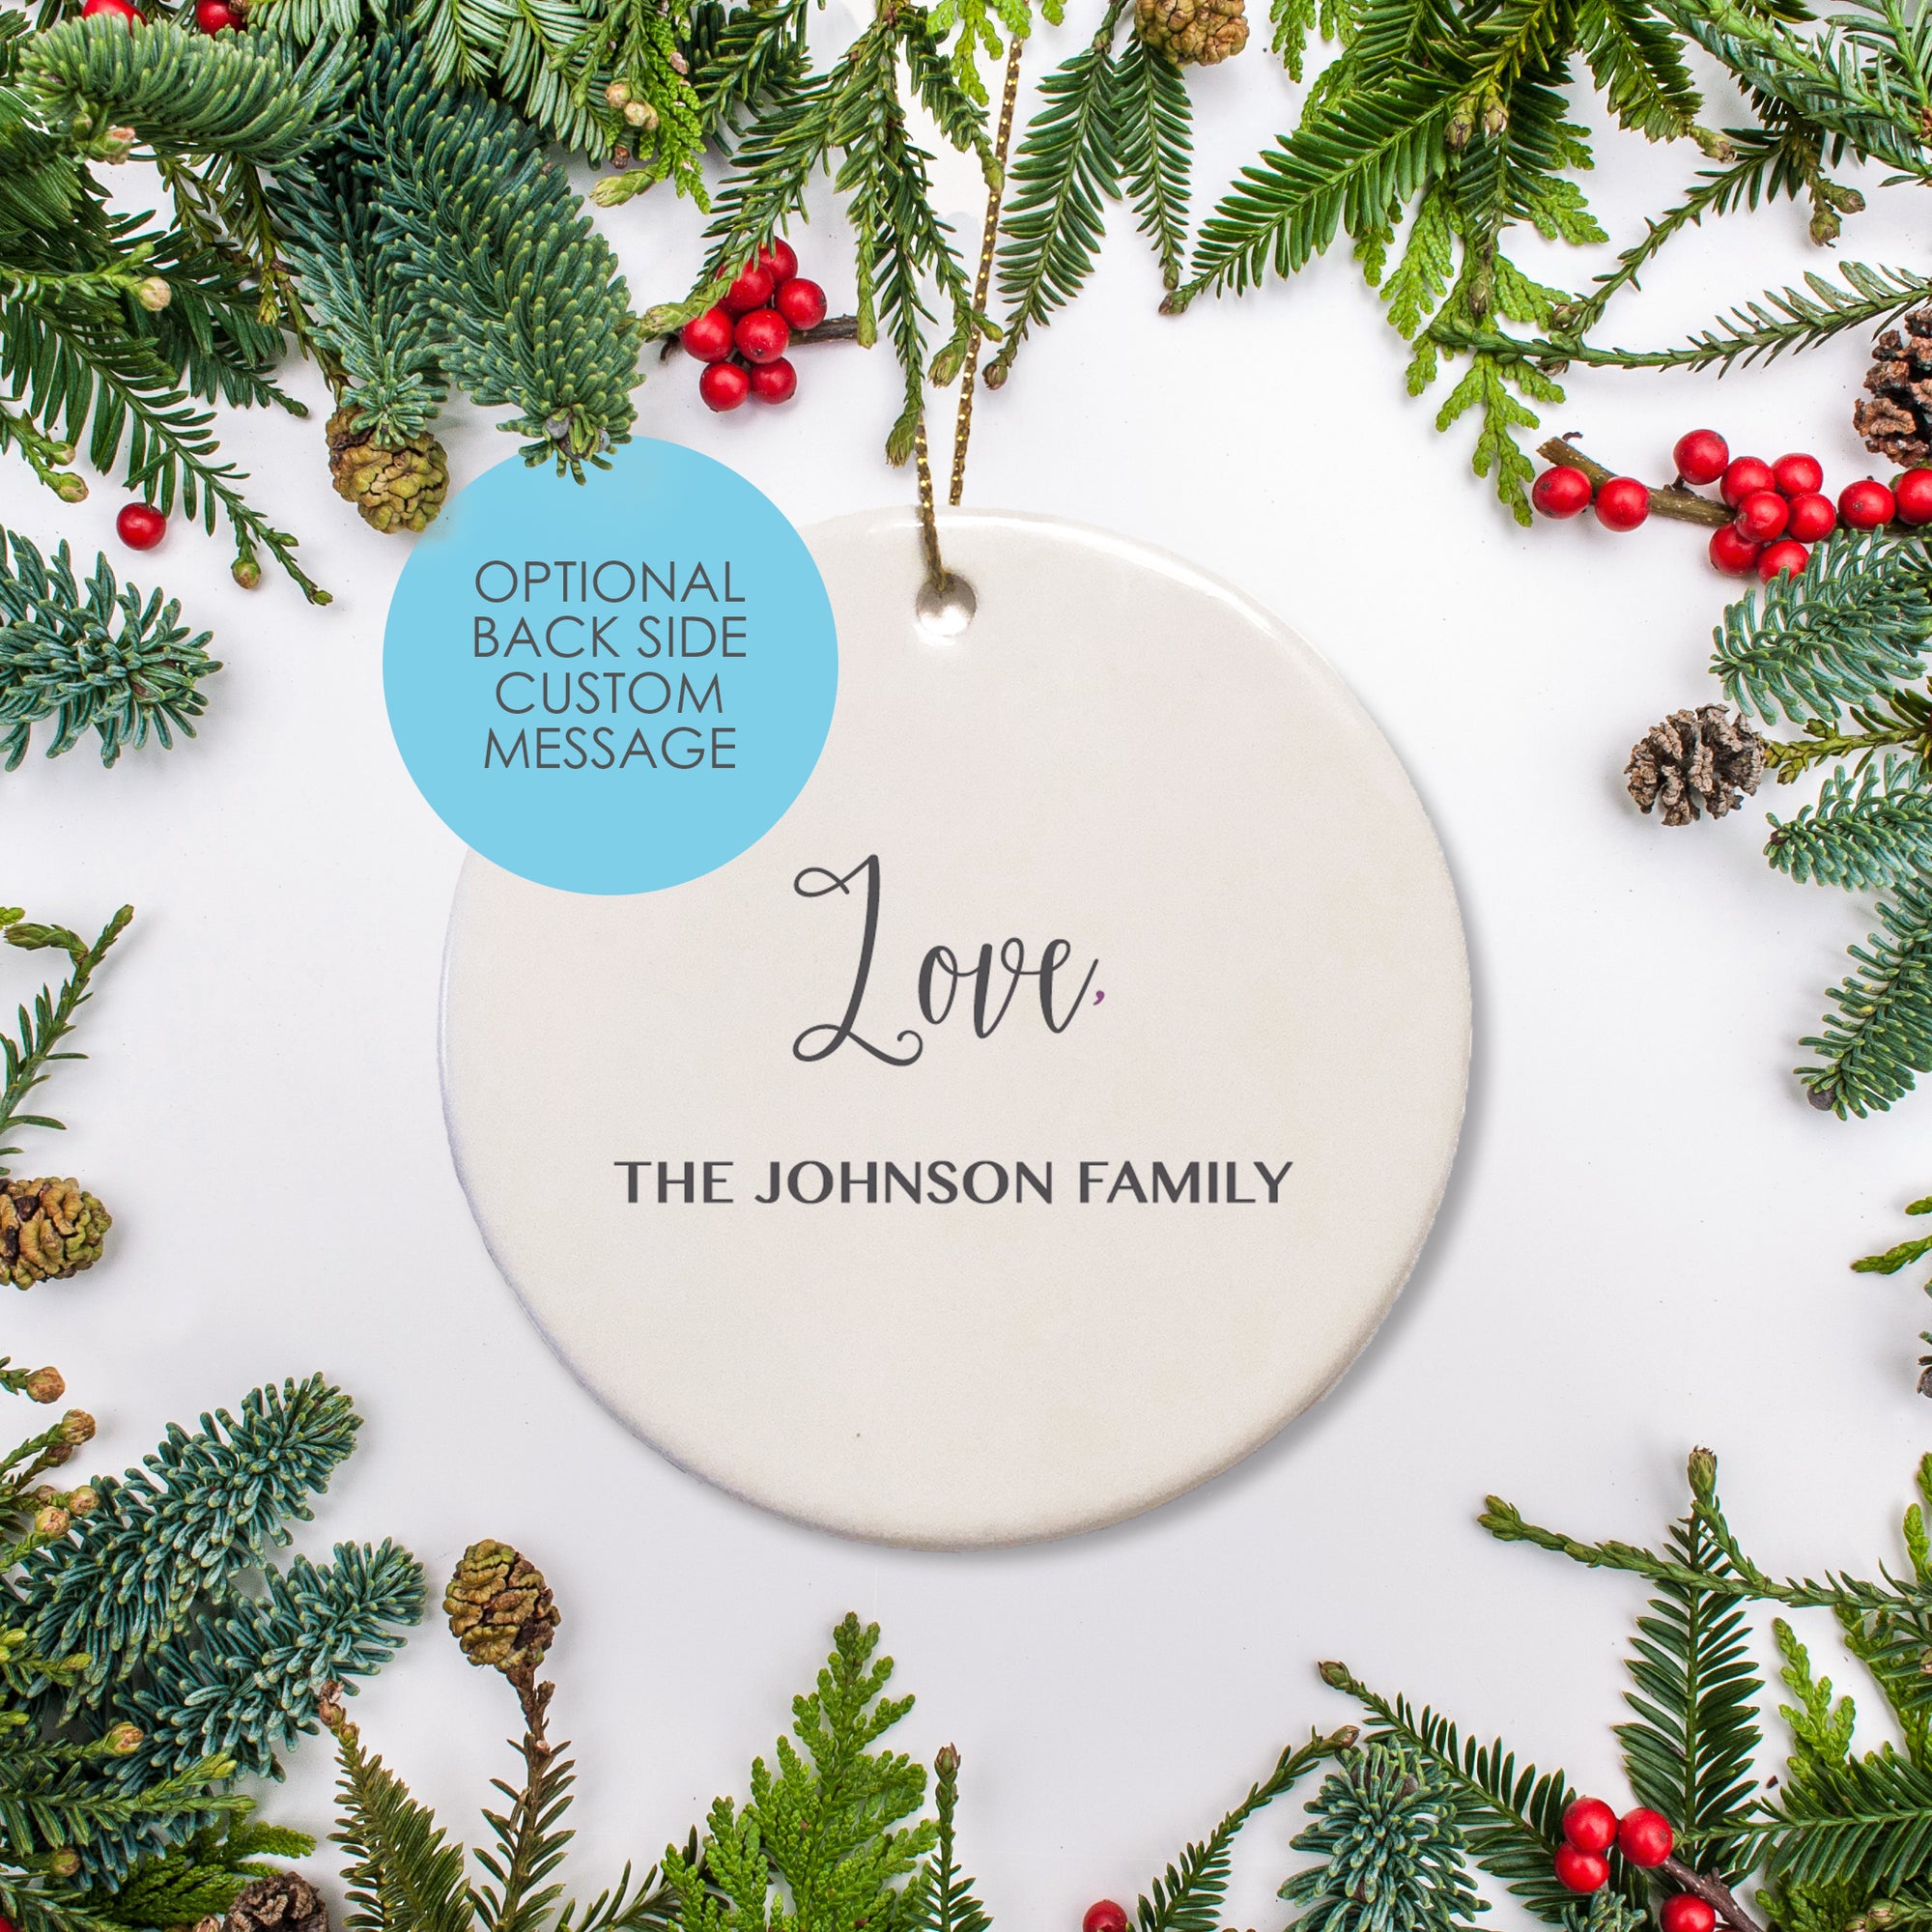 Ceramic Round Custom Holiday Ornament. Personalize with your own custom message